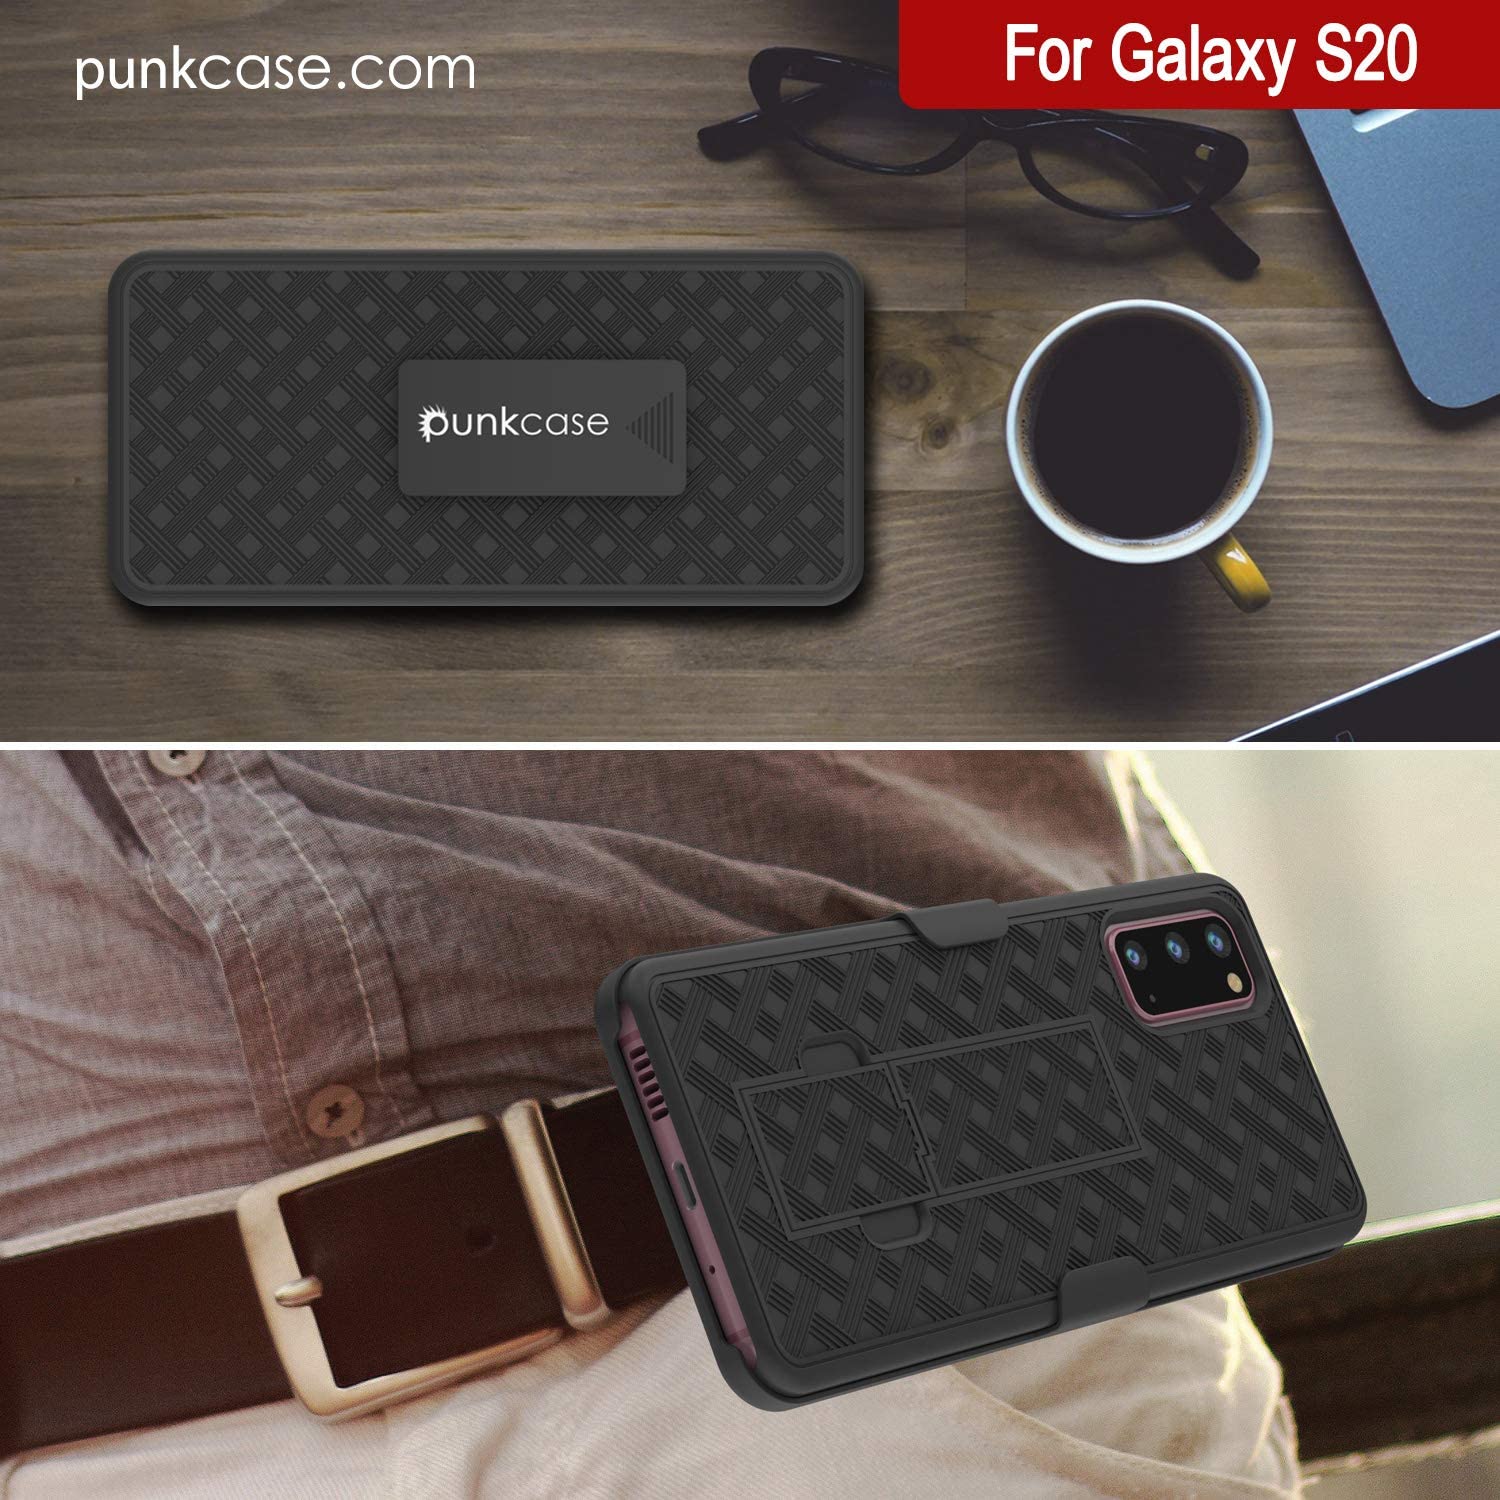 Punkcase Galaxy S20 Case With Screen Protector, Holster Belt Clip [Black]